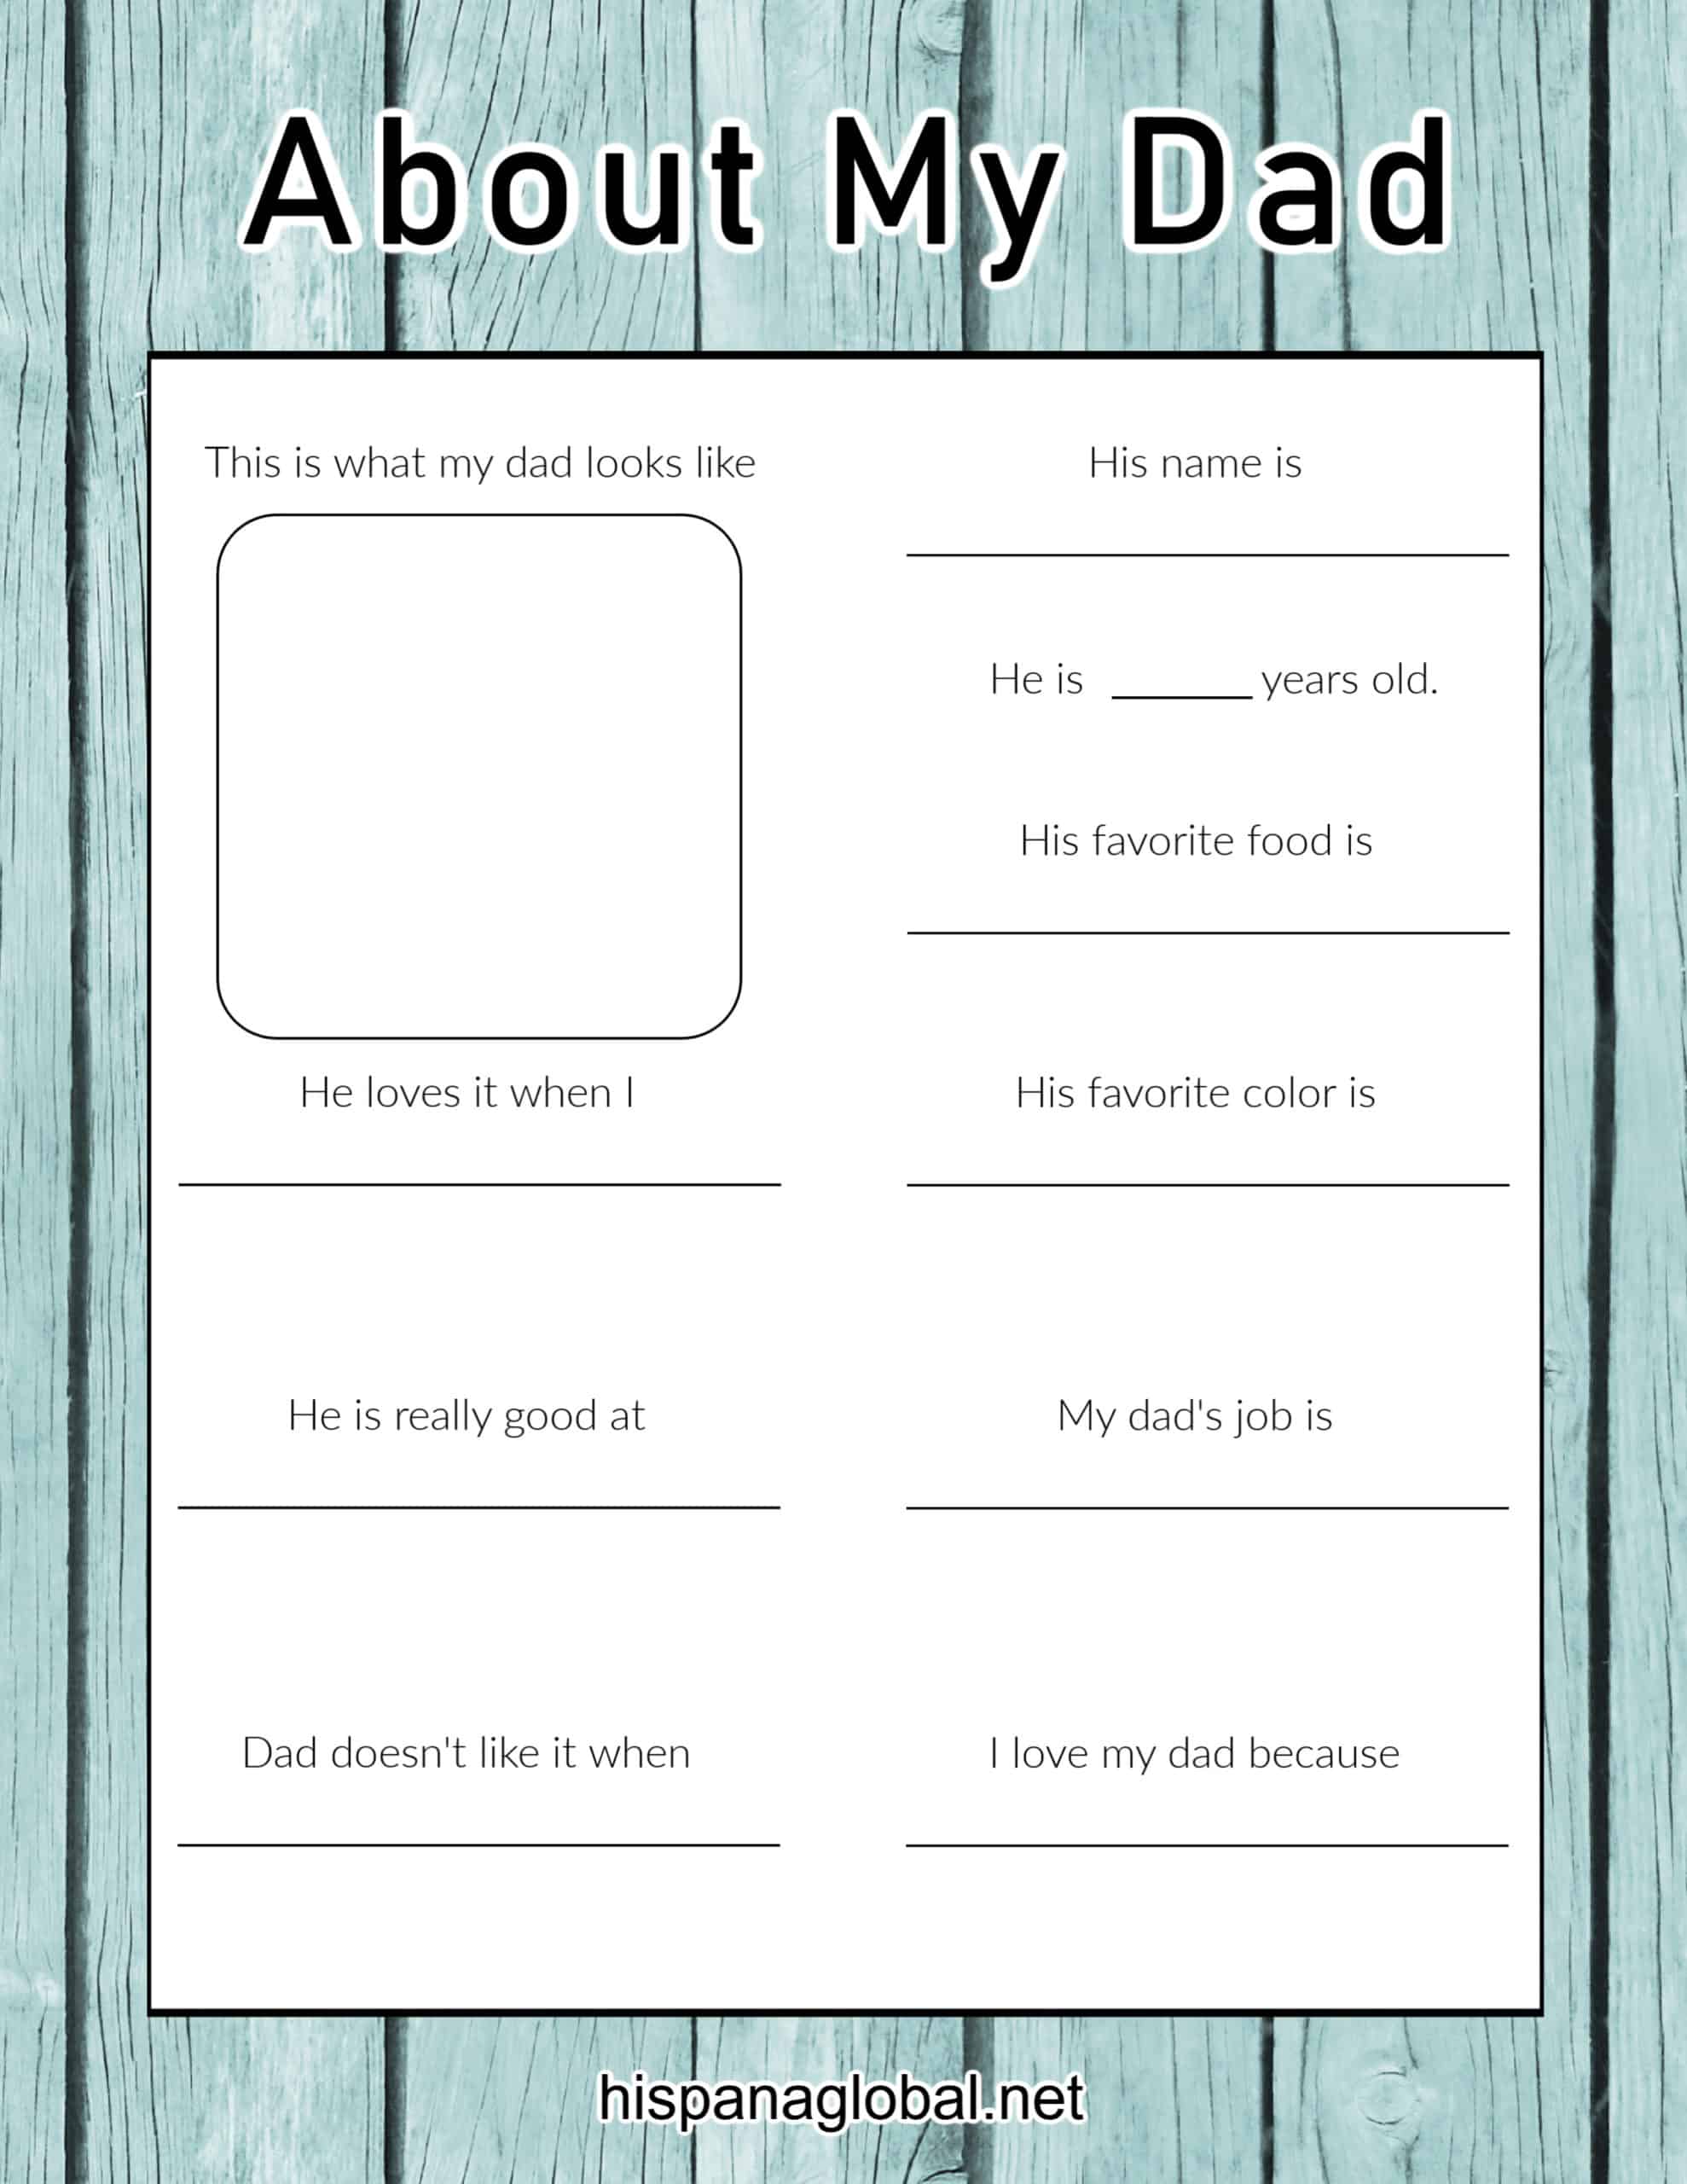 Fathers Day About My Dad printable activity sheet